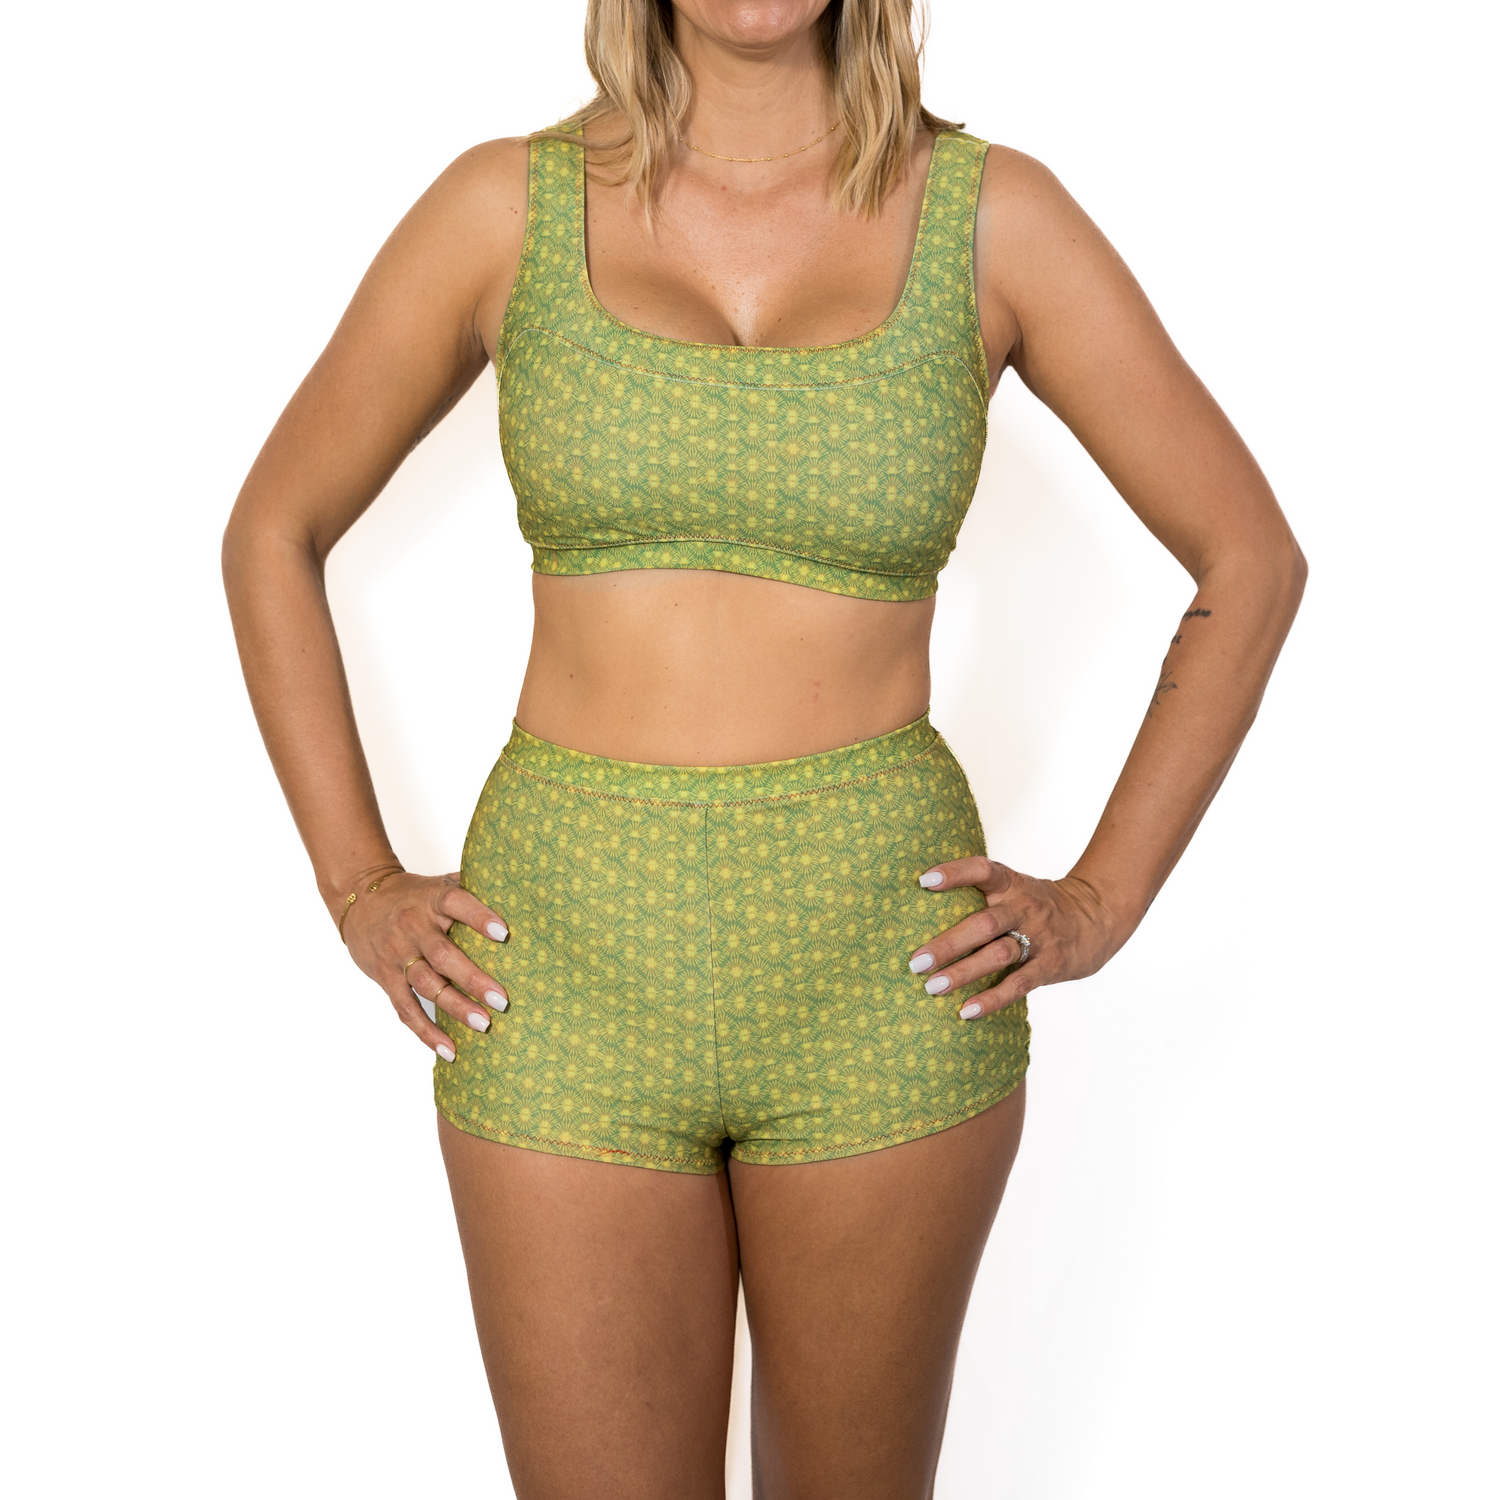 Aima Dora - Surf Shorty Bottom - Front / Turtle Bay - Baie aux tortues